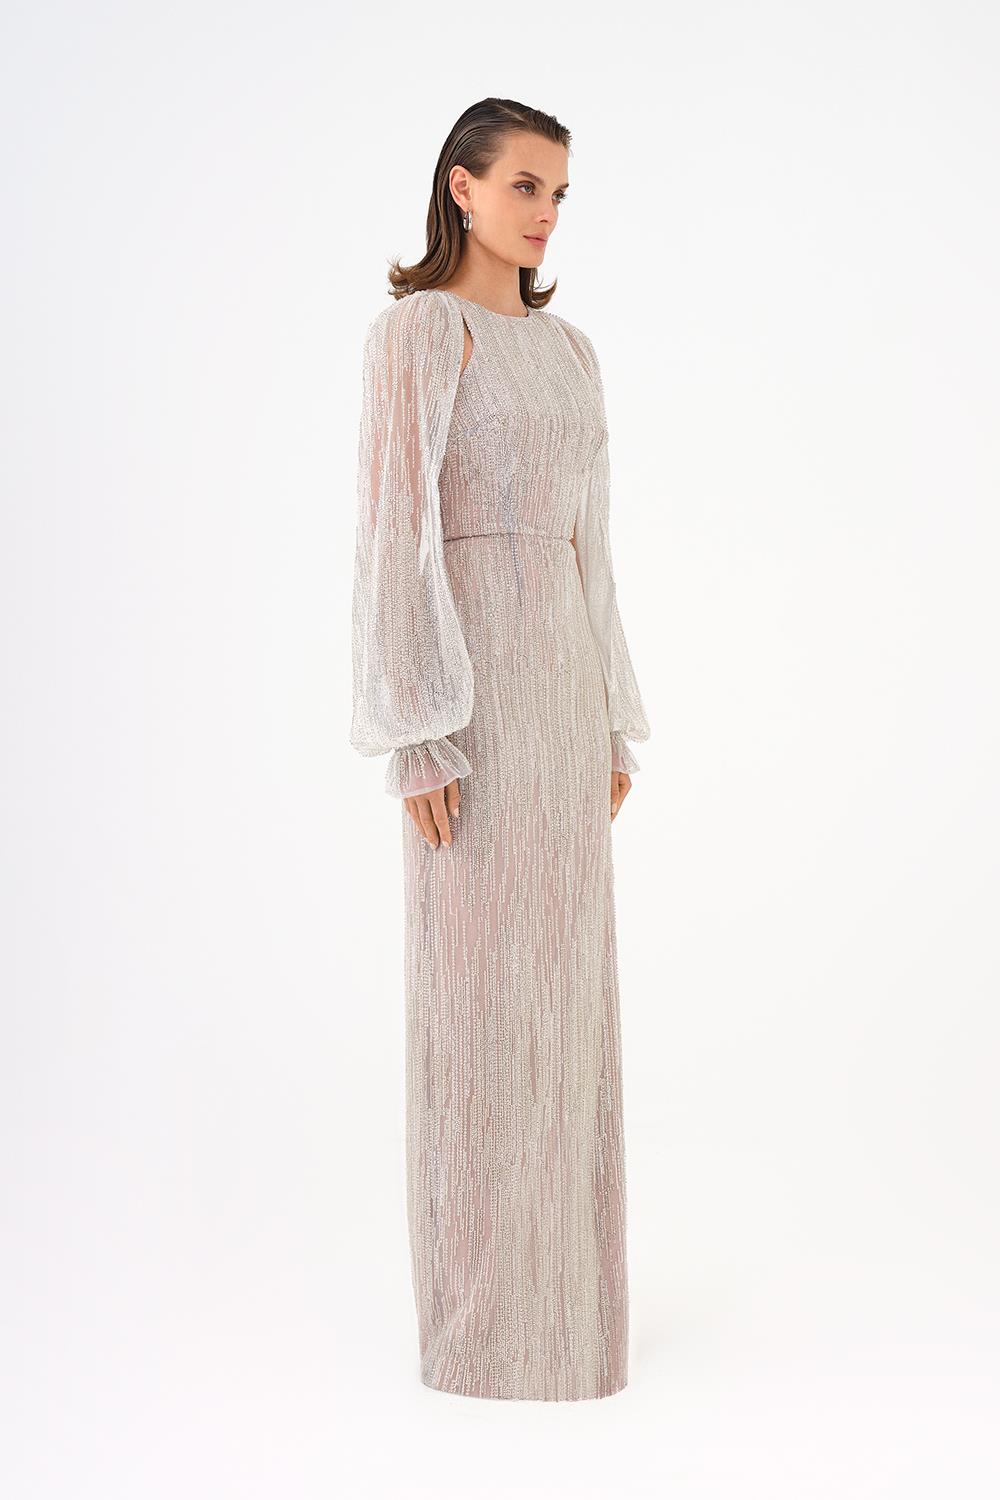 Chiffon Sleeve Detailed Stone Embroidered Long Evening Dress